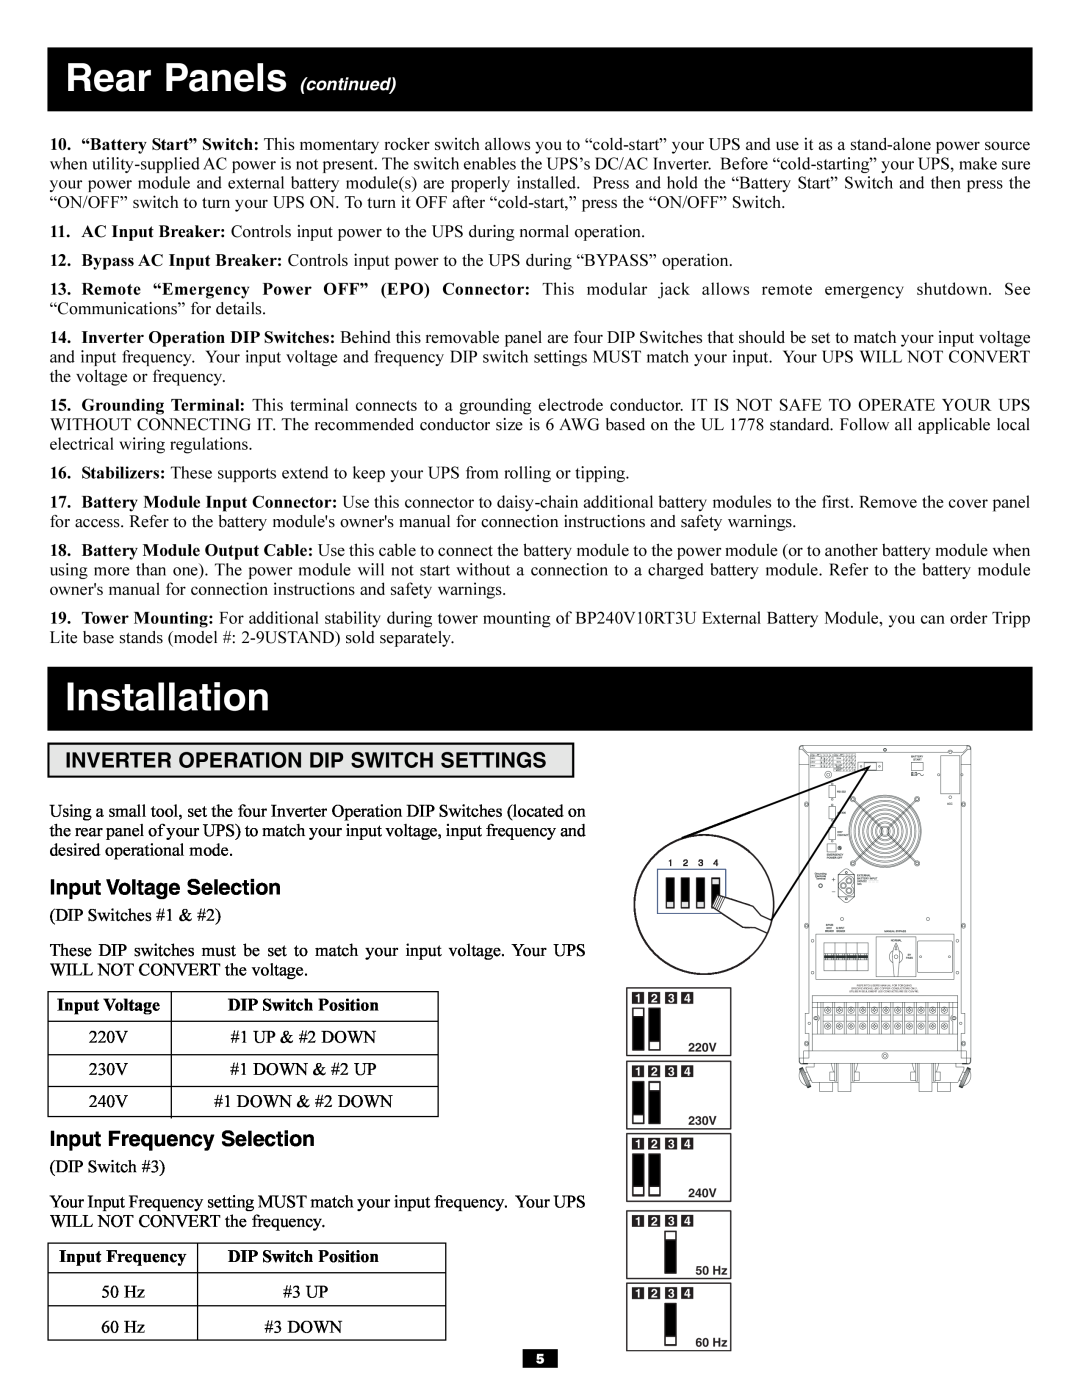 Tripp Lite 220/230/240V AC / 12W owner manual Rear Panels continued, Installation, Inverter Operation Dip Switch Settings 